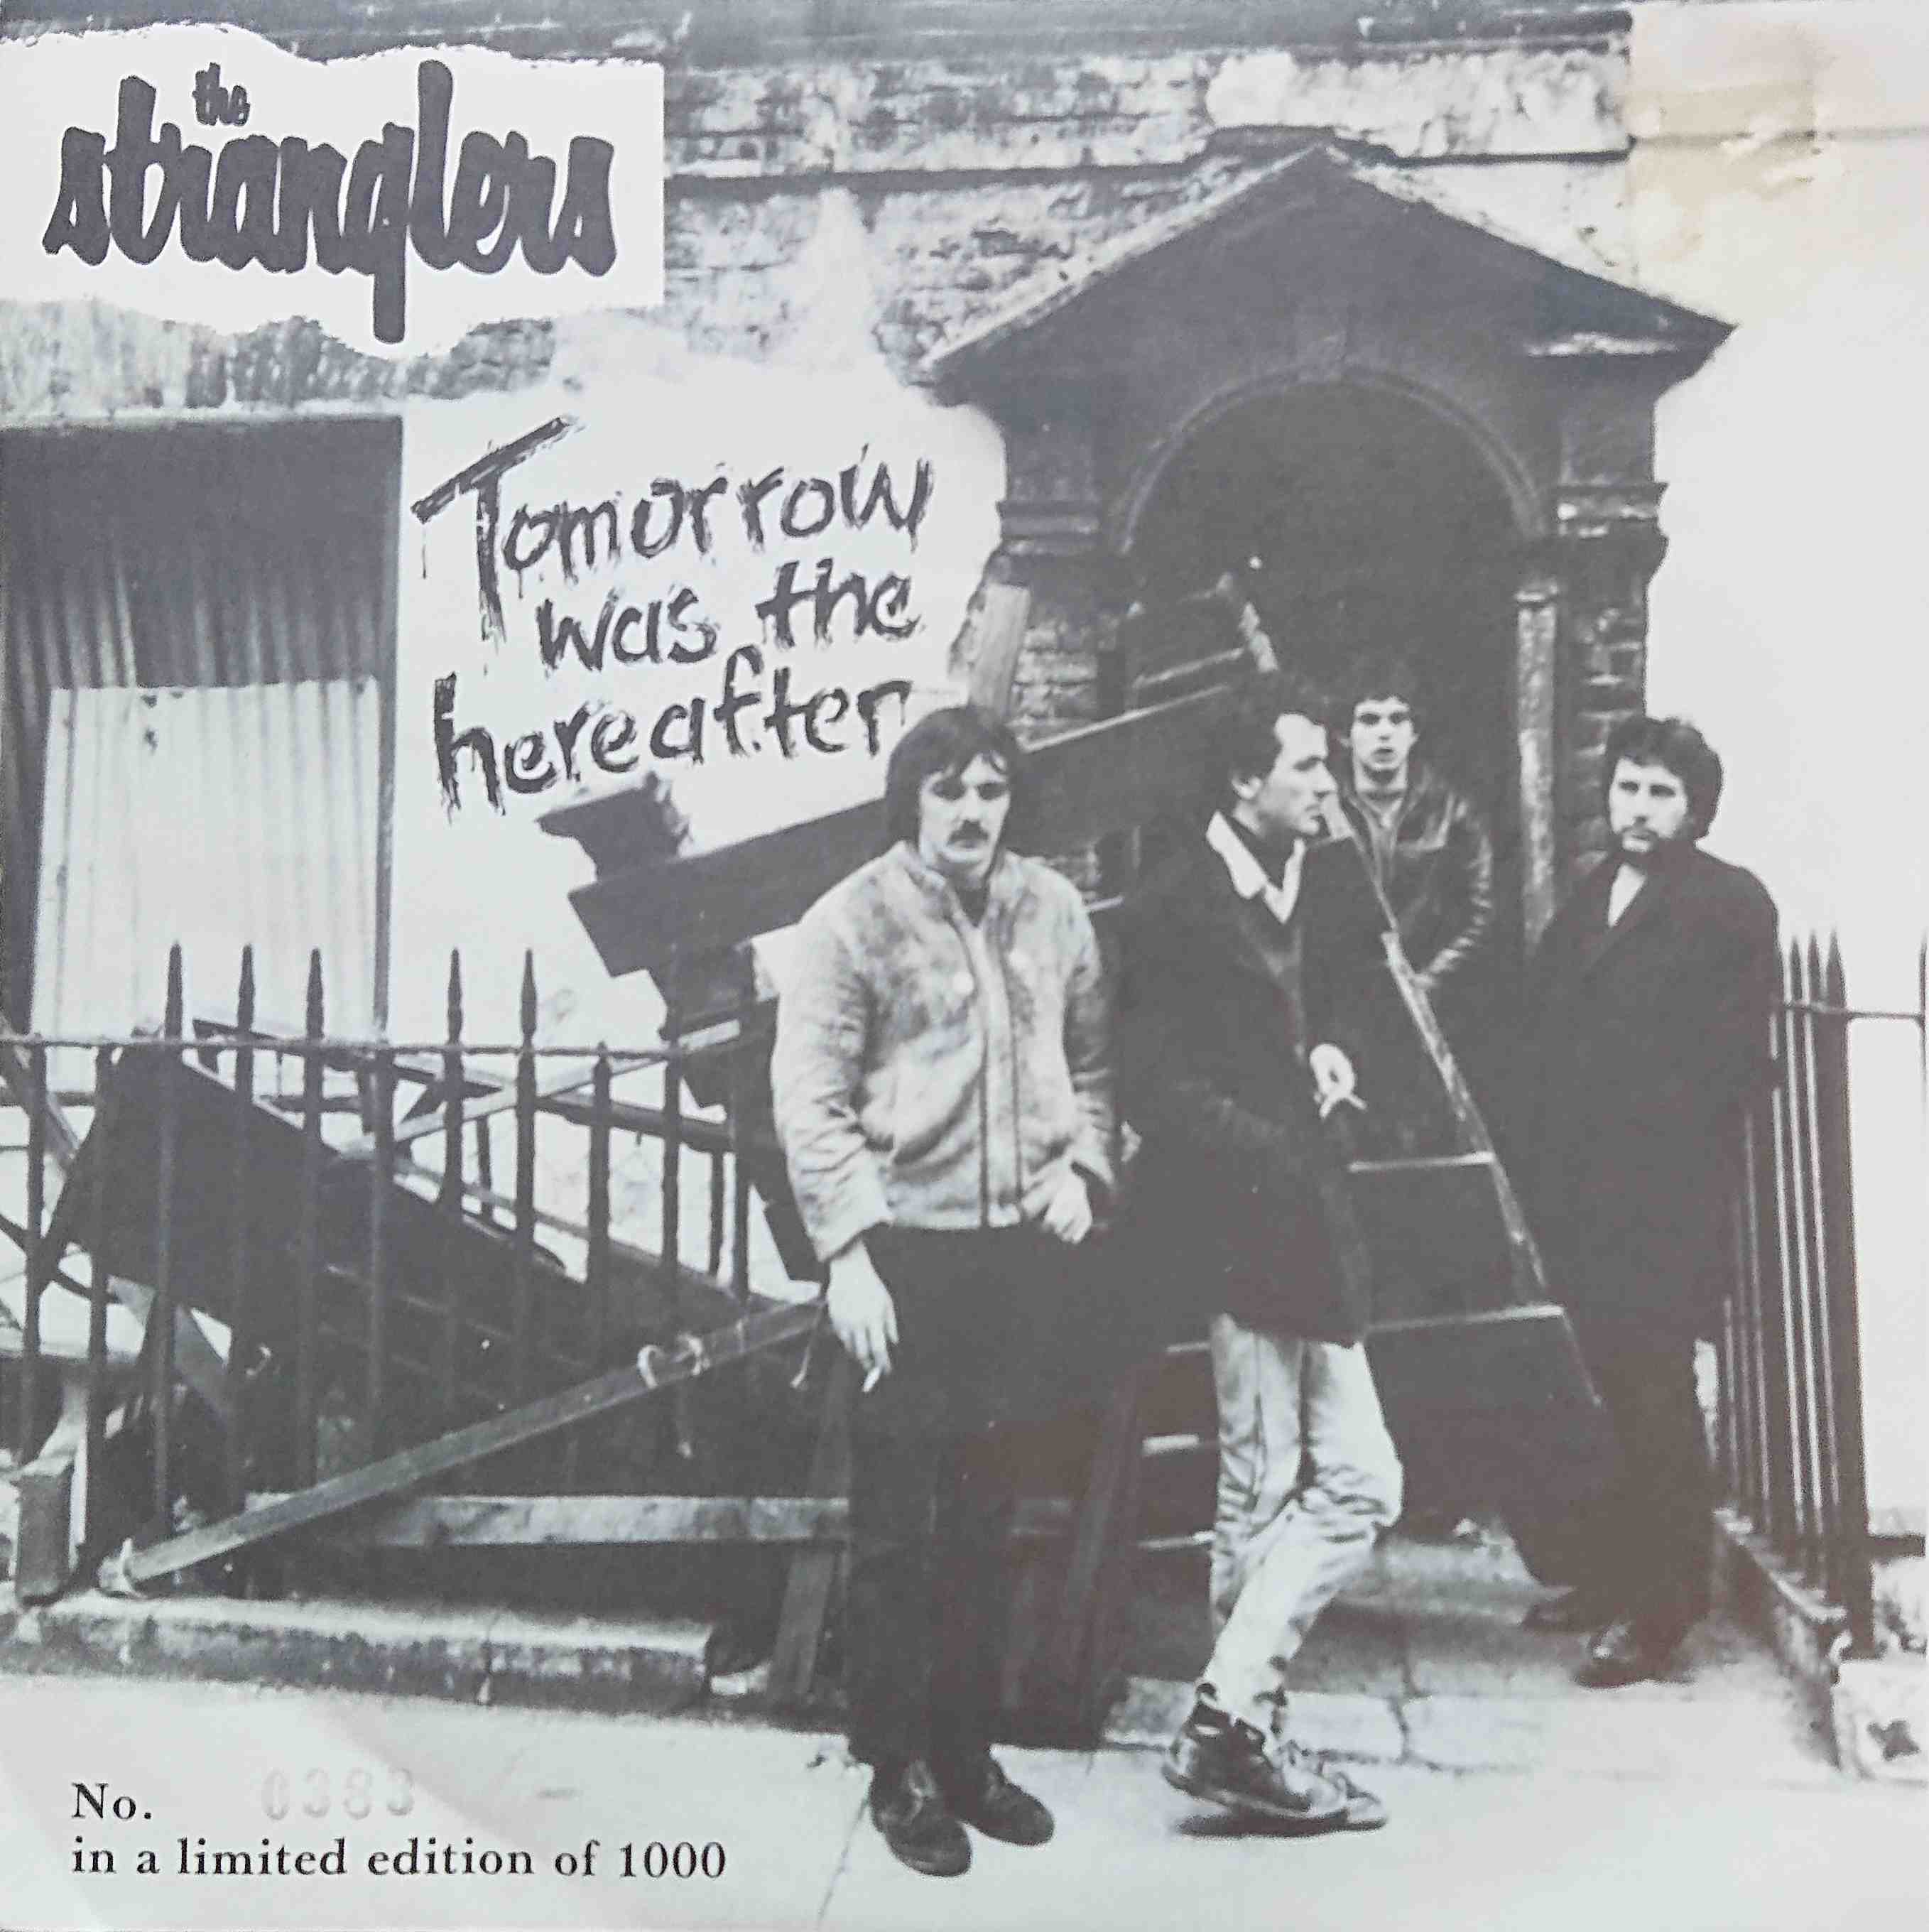 Picture of Tomorrow was the hereafter by artist The Stranglers from The Stranglers singles